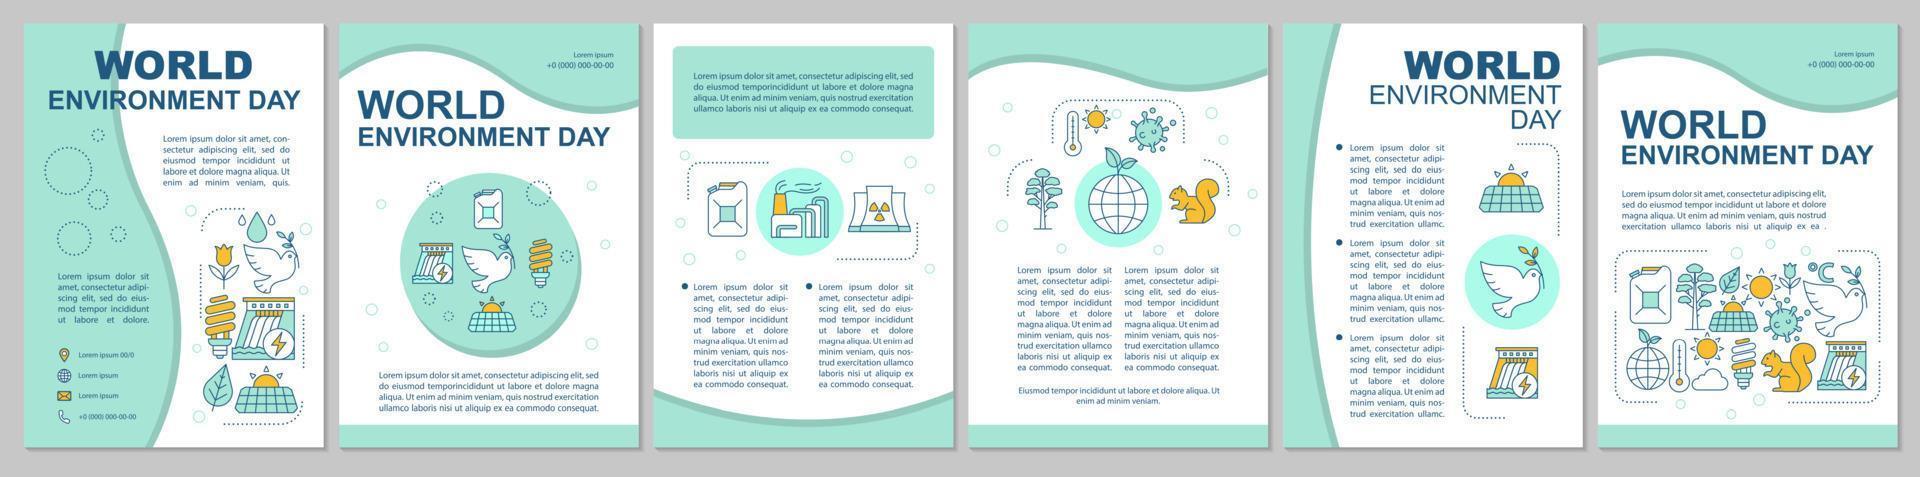 World environment day brochure template layout. Flyer, booklet, leaflet print design. Green technology and alternative energy. Environmental issues. Vector page layouts for magazines, reports, posters